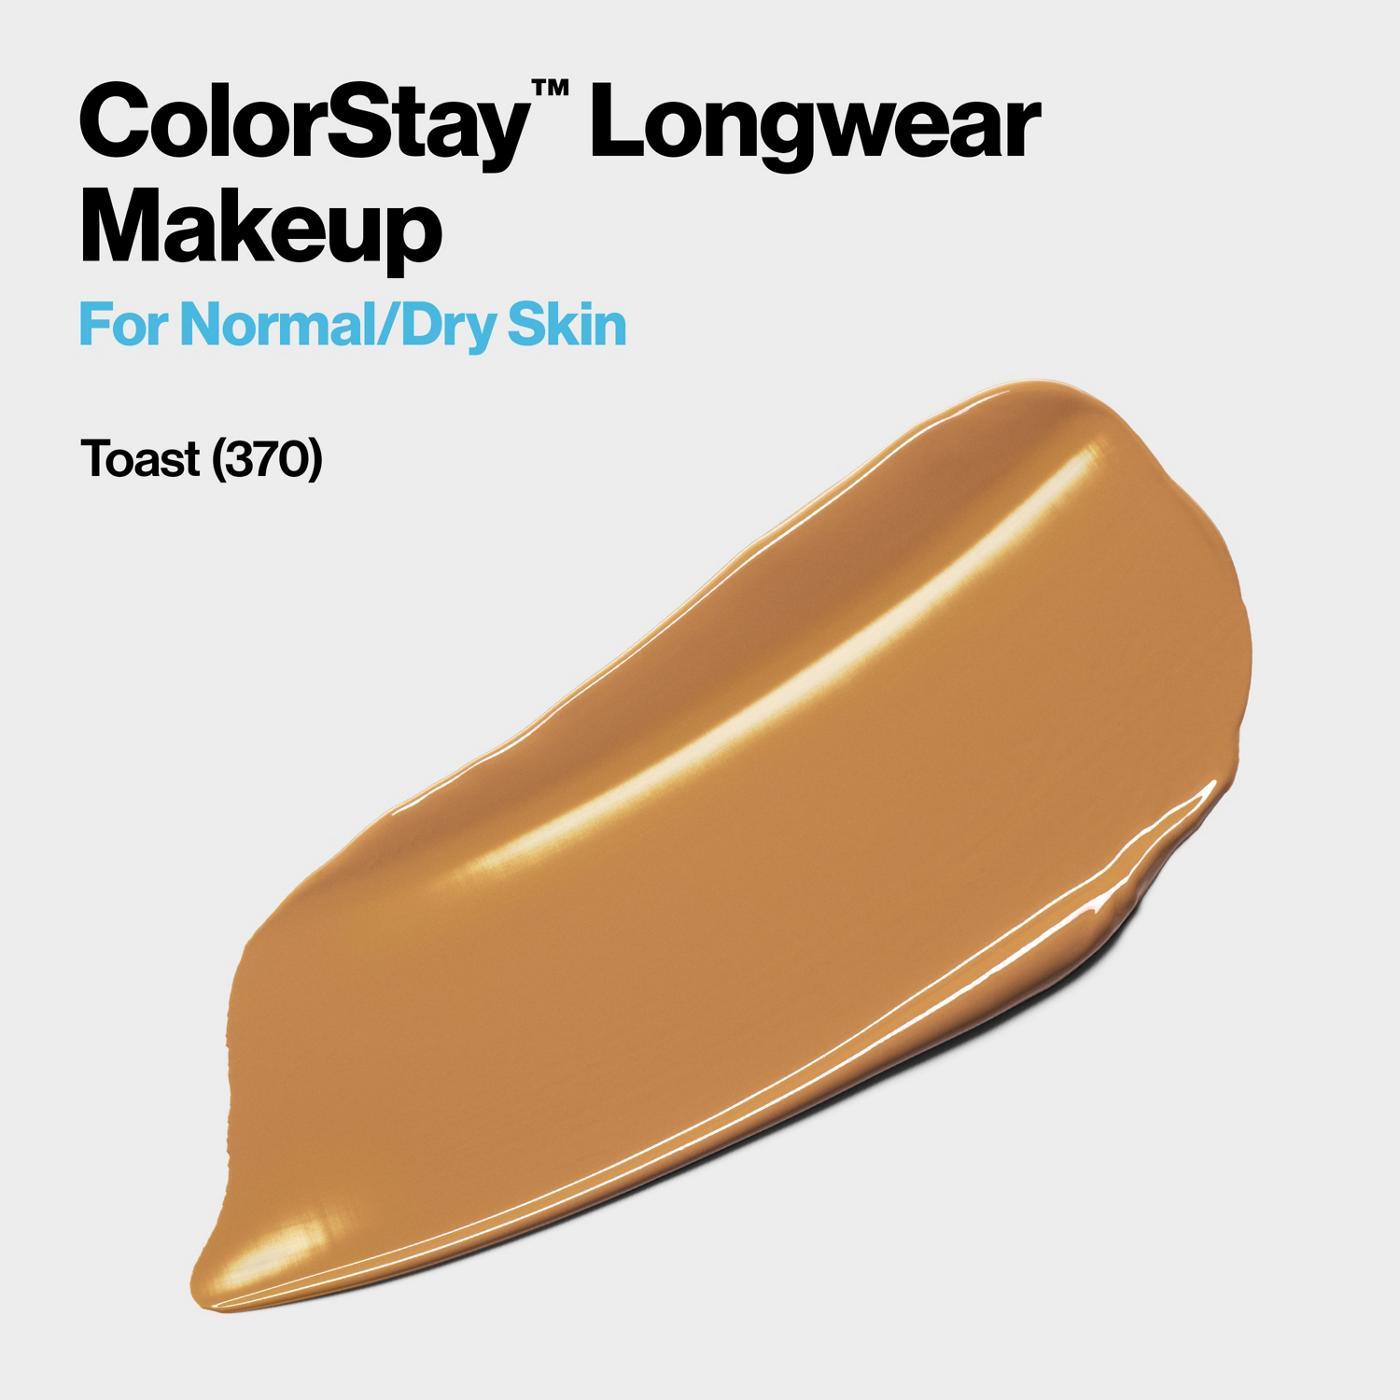 Revlon ColorStay Makeup for Normal/Dry Skin, 370 Toast; image 5 of 6